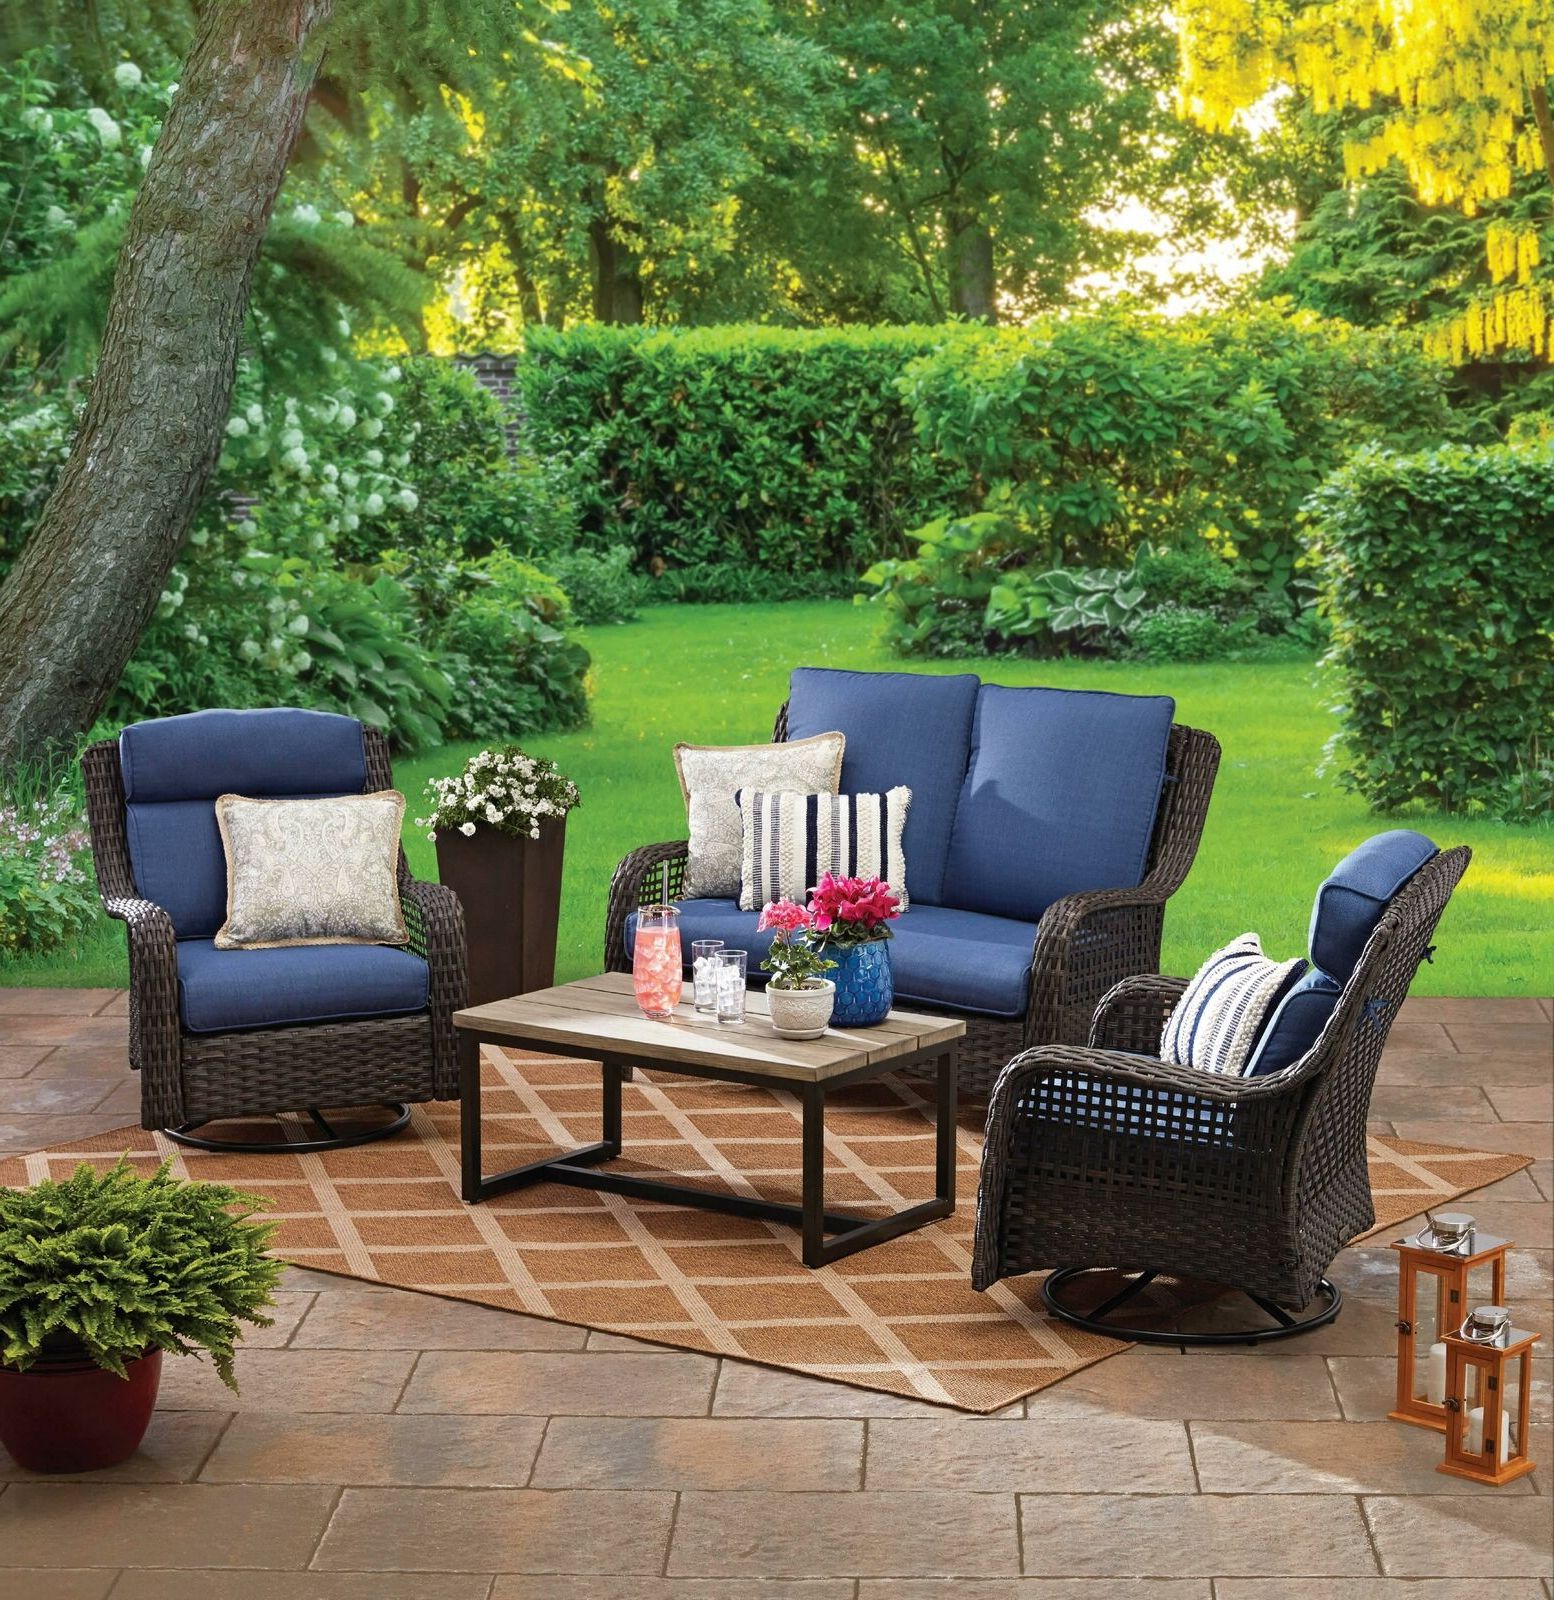 Ebay Pertaining To Preferred Loveseat Chairs For Backyard (View 8 of 15)